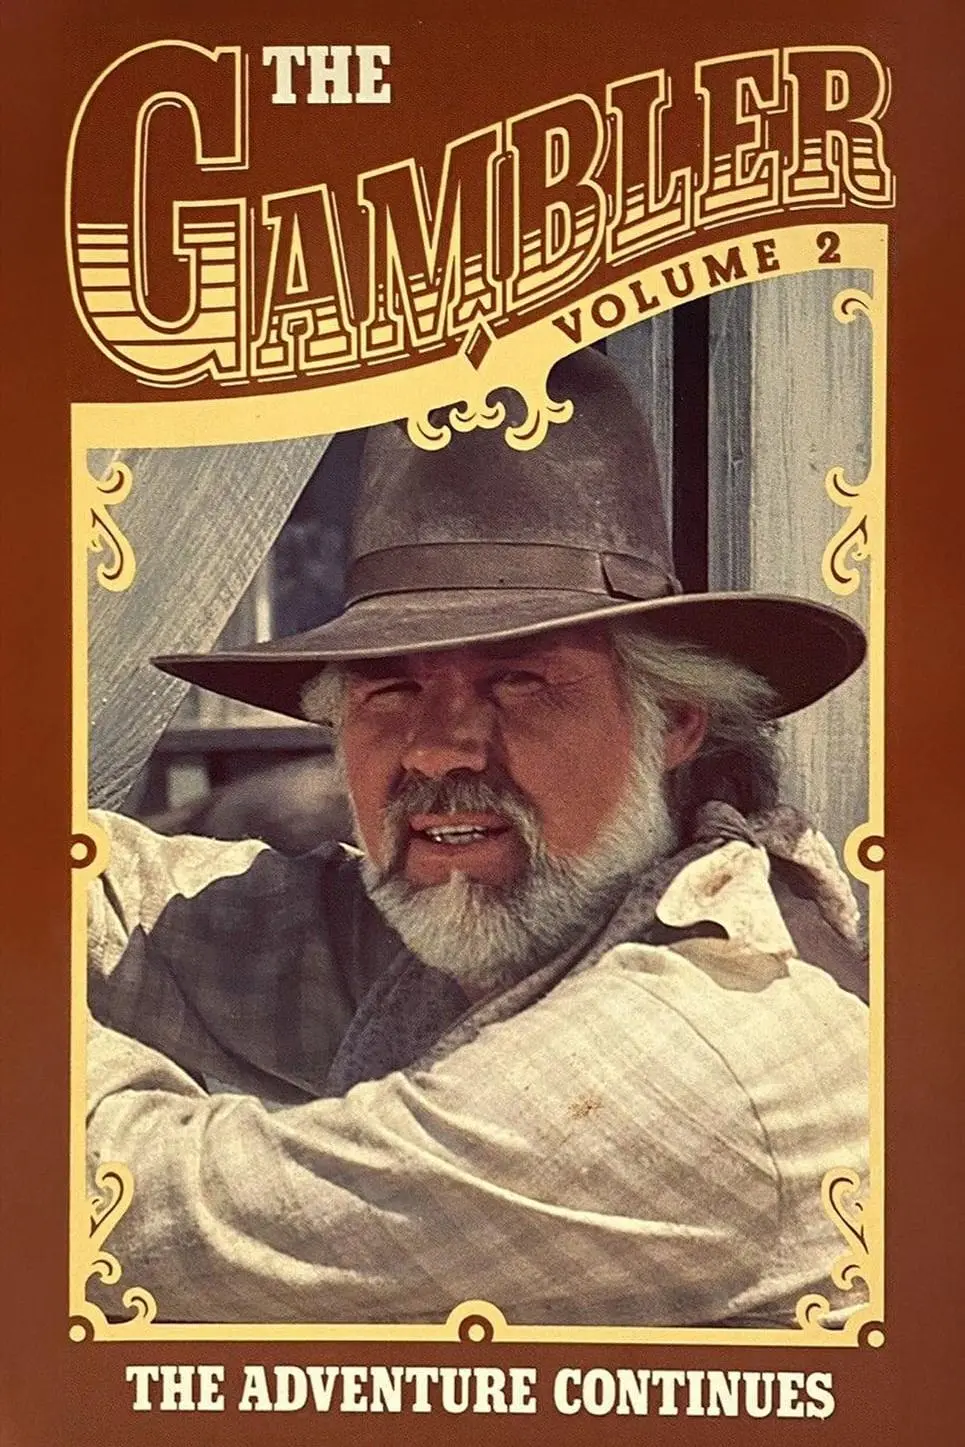 Kenny Rogers as The Gambler: The Adventure Continues_peliplat